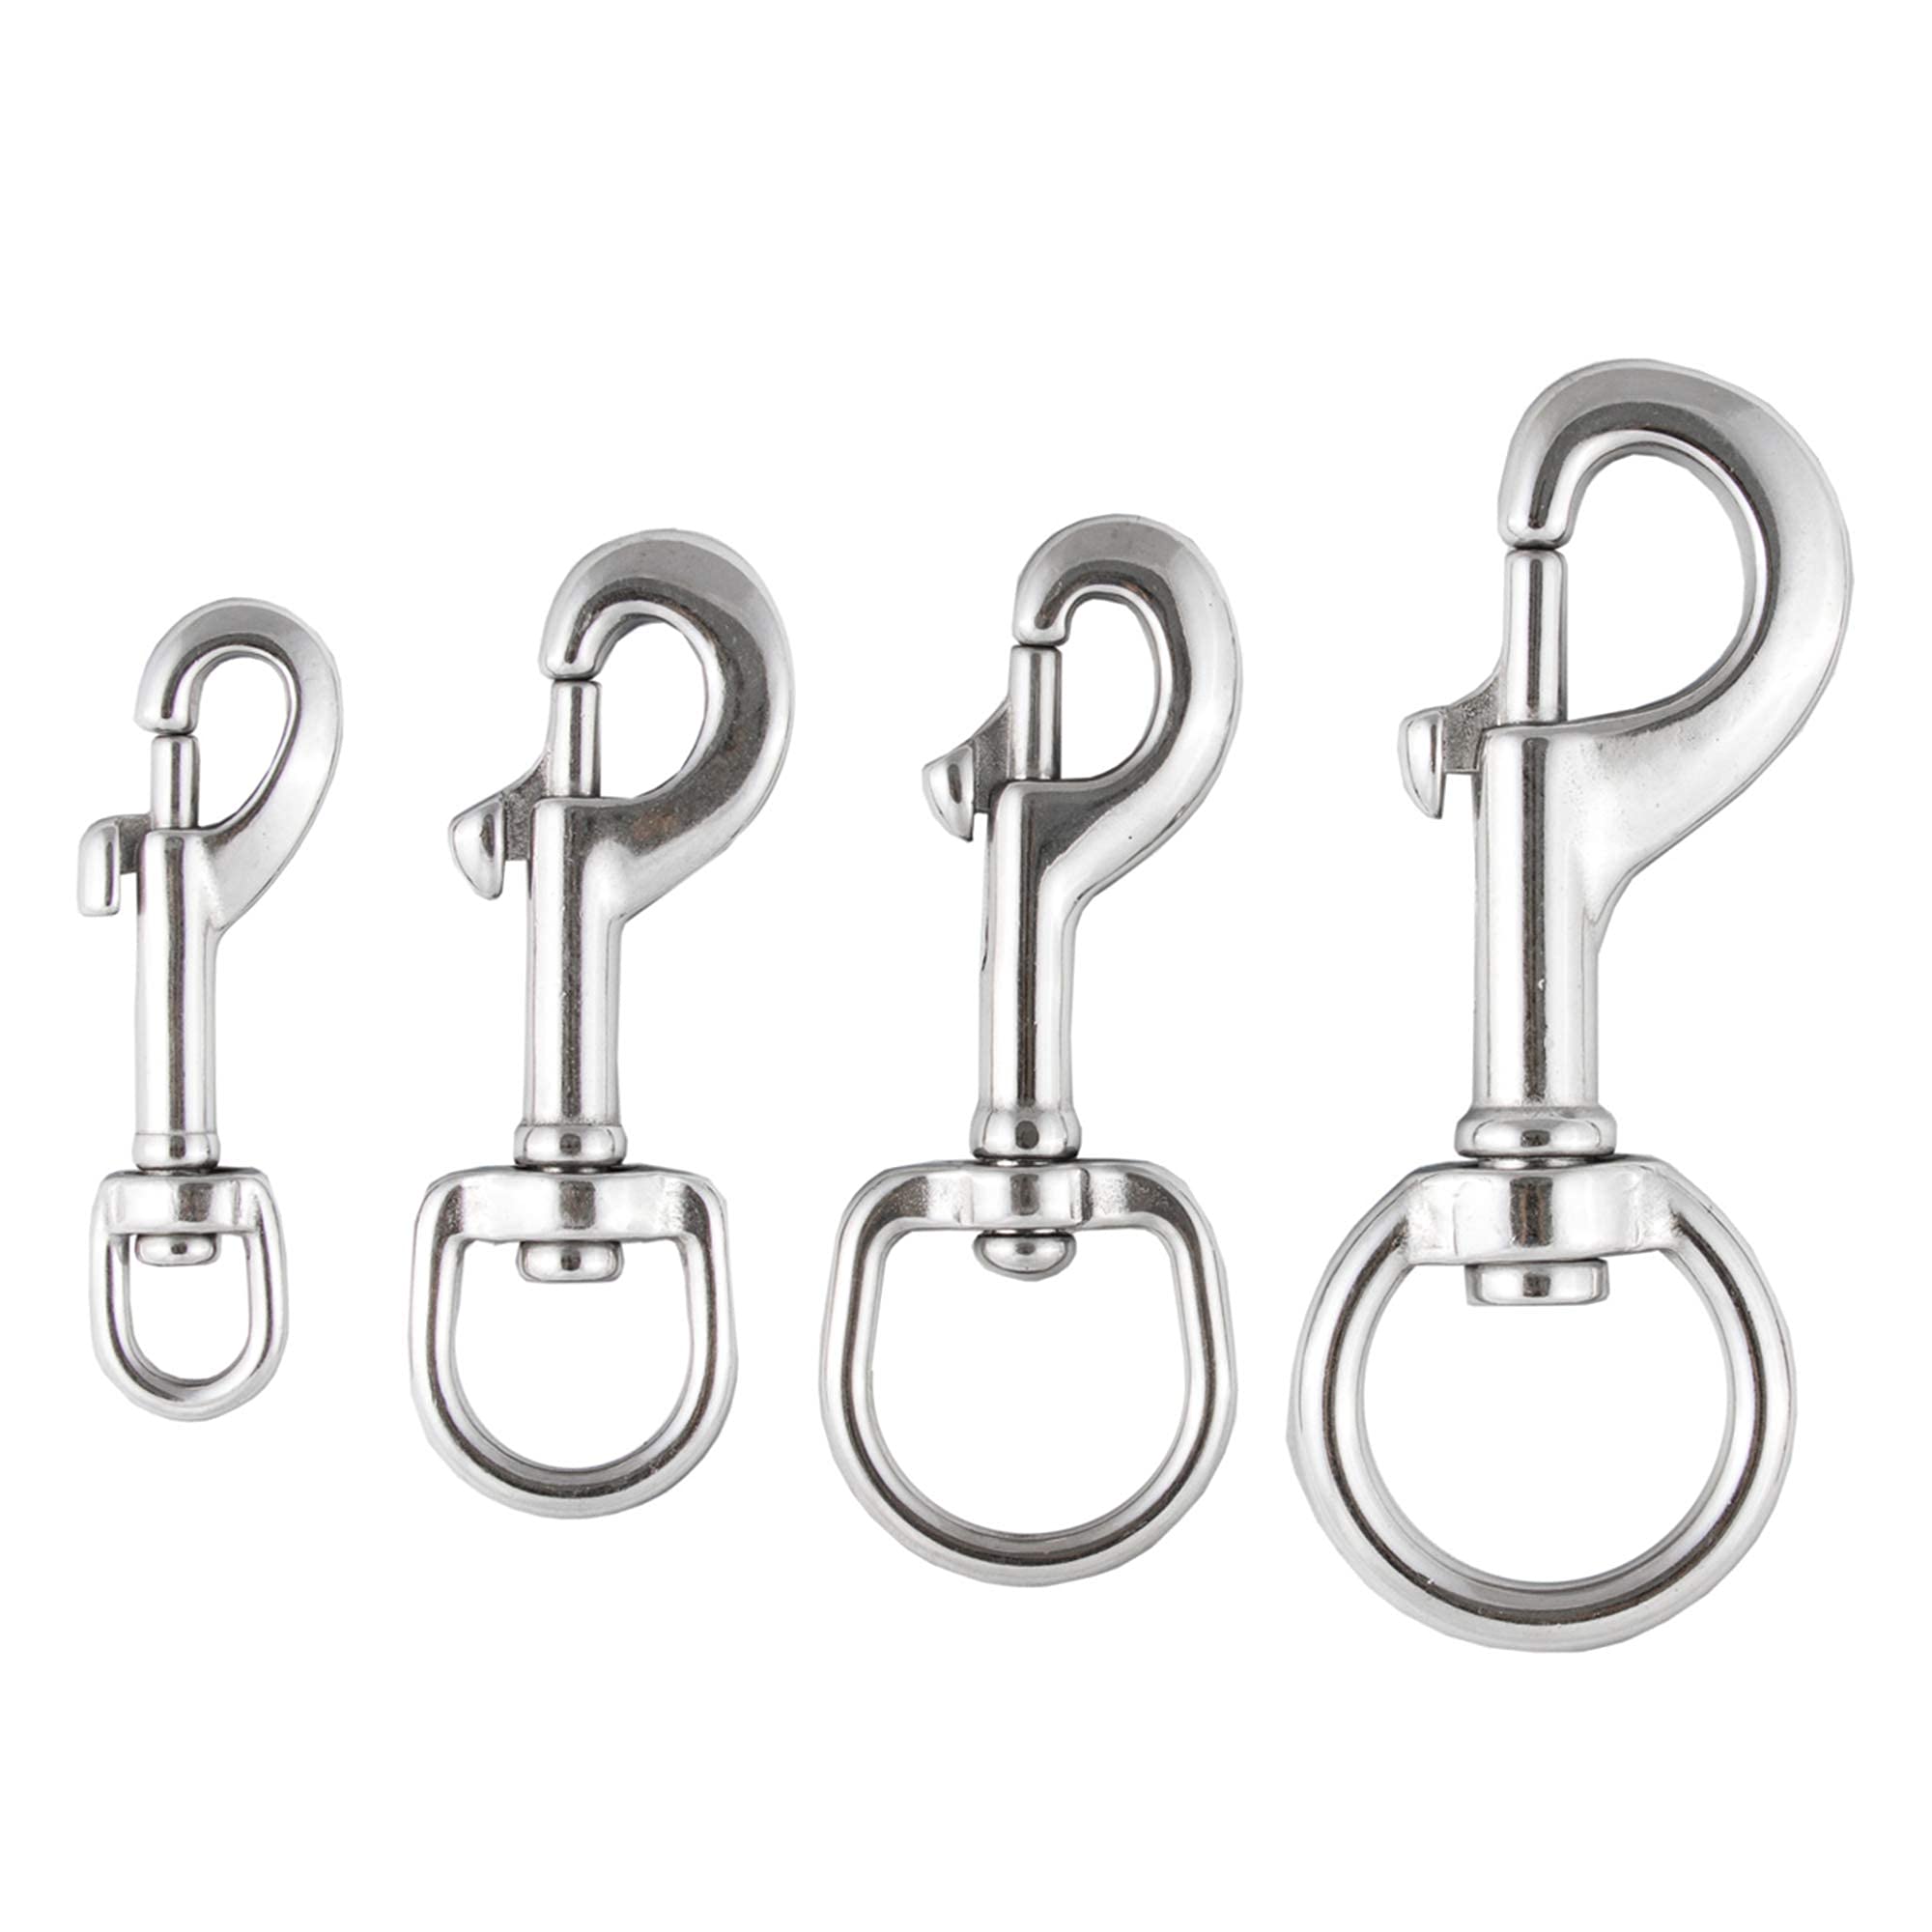 Dive Rite Marine Grade Stainless Steel Bolt Snap for Diving XL-Swivel